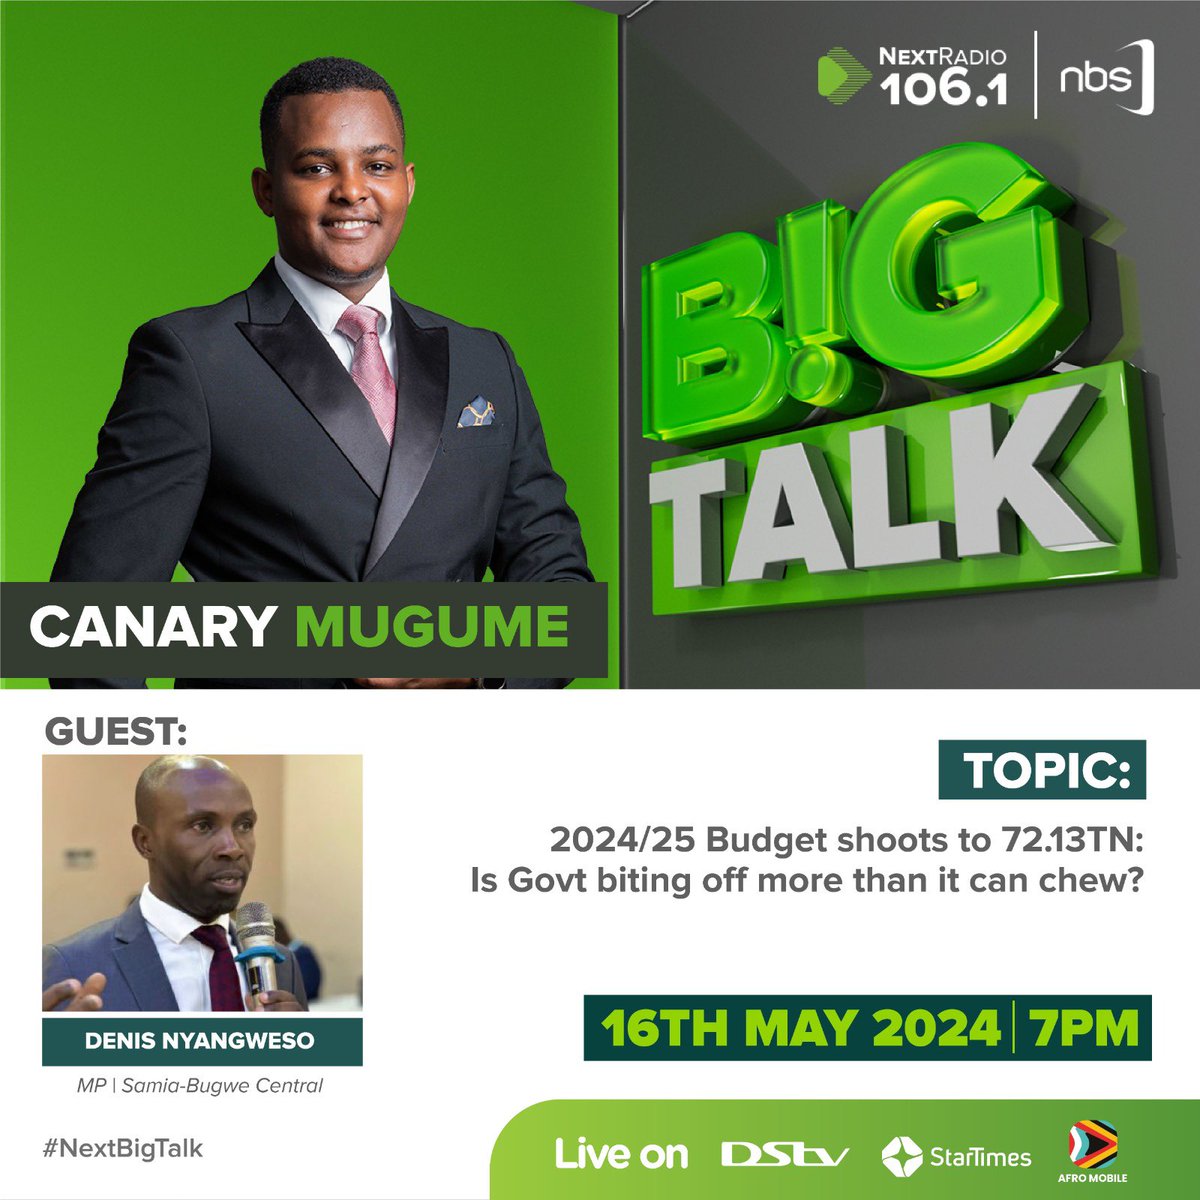 At Exactly 7pm. Discussions on the 24/25 budget shooting to 72.13trillion will dominate talks. Share your thoughts with @CanaryMugume ahead of the show. #NextBigTalk